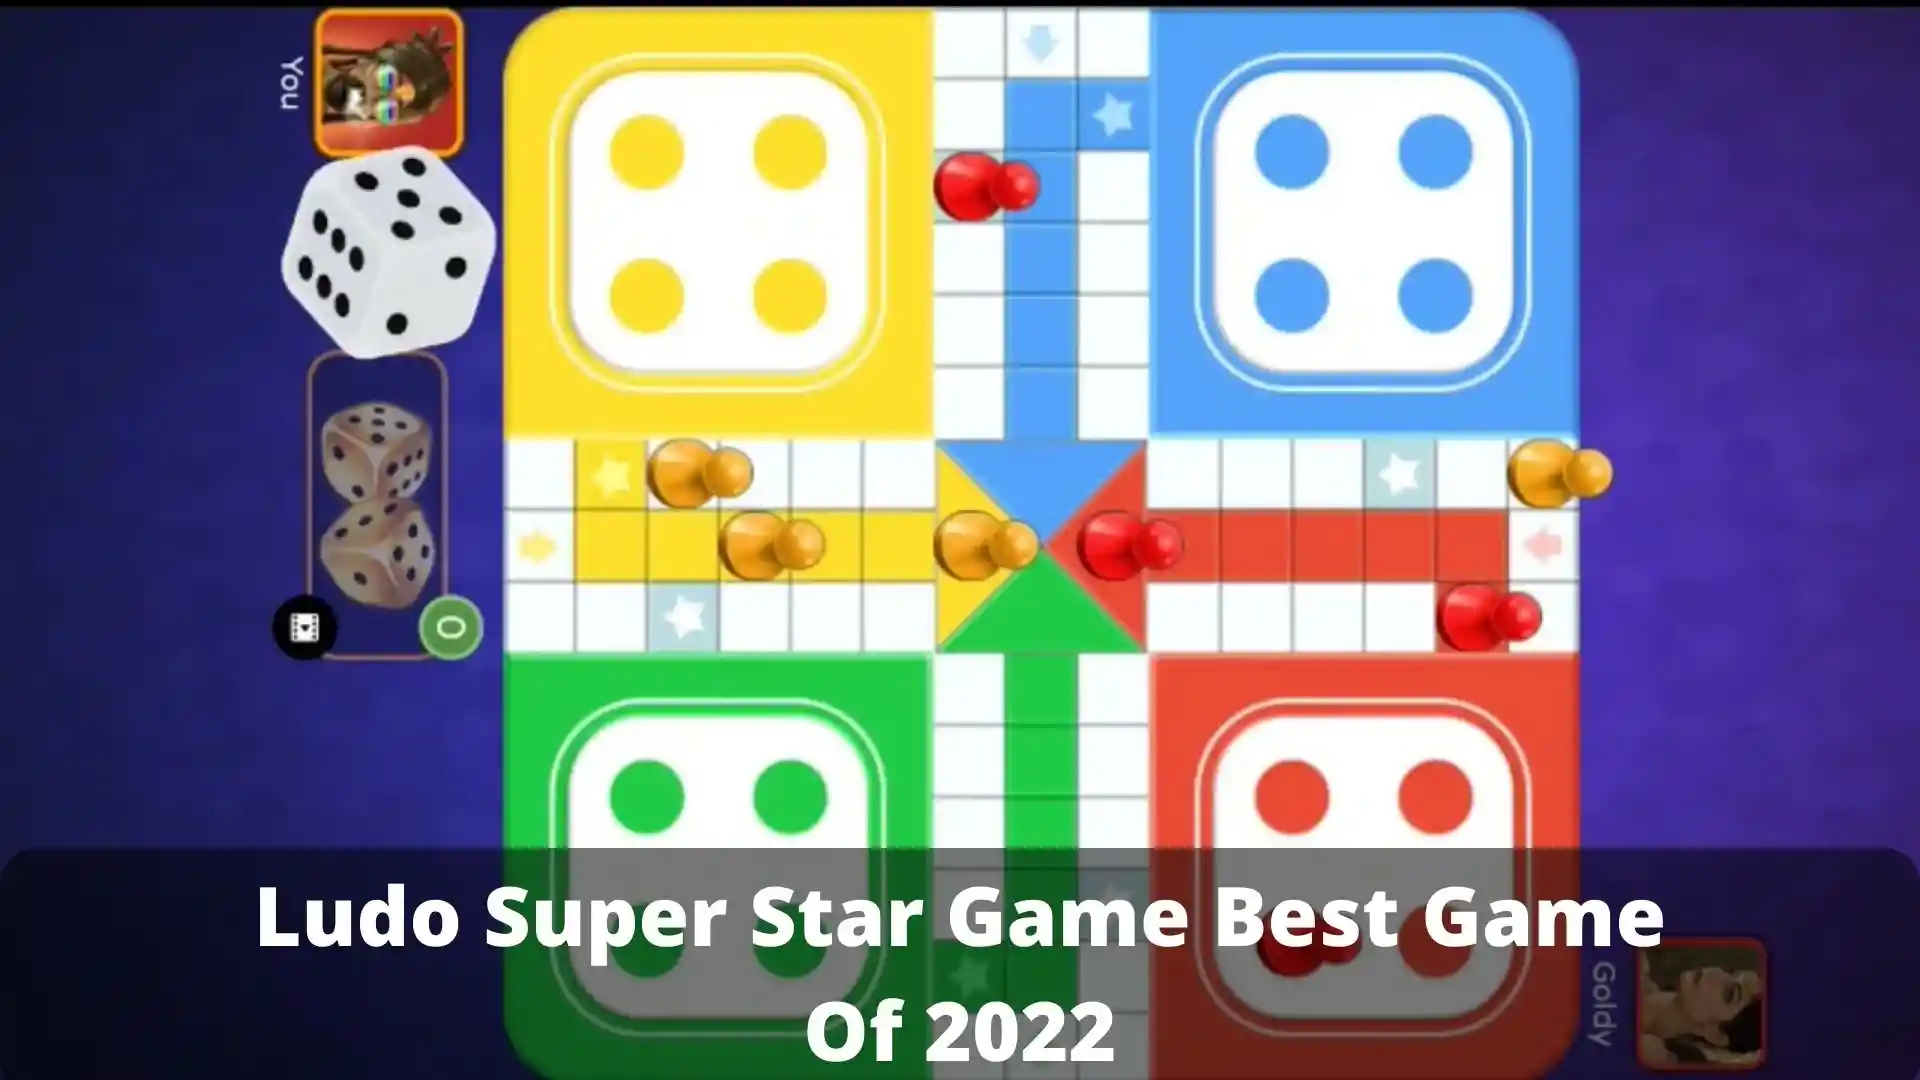 Ludo Super Star Game Best Game Of 2022